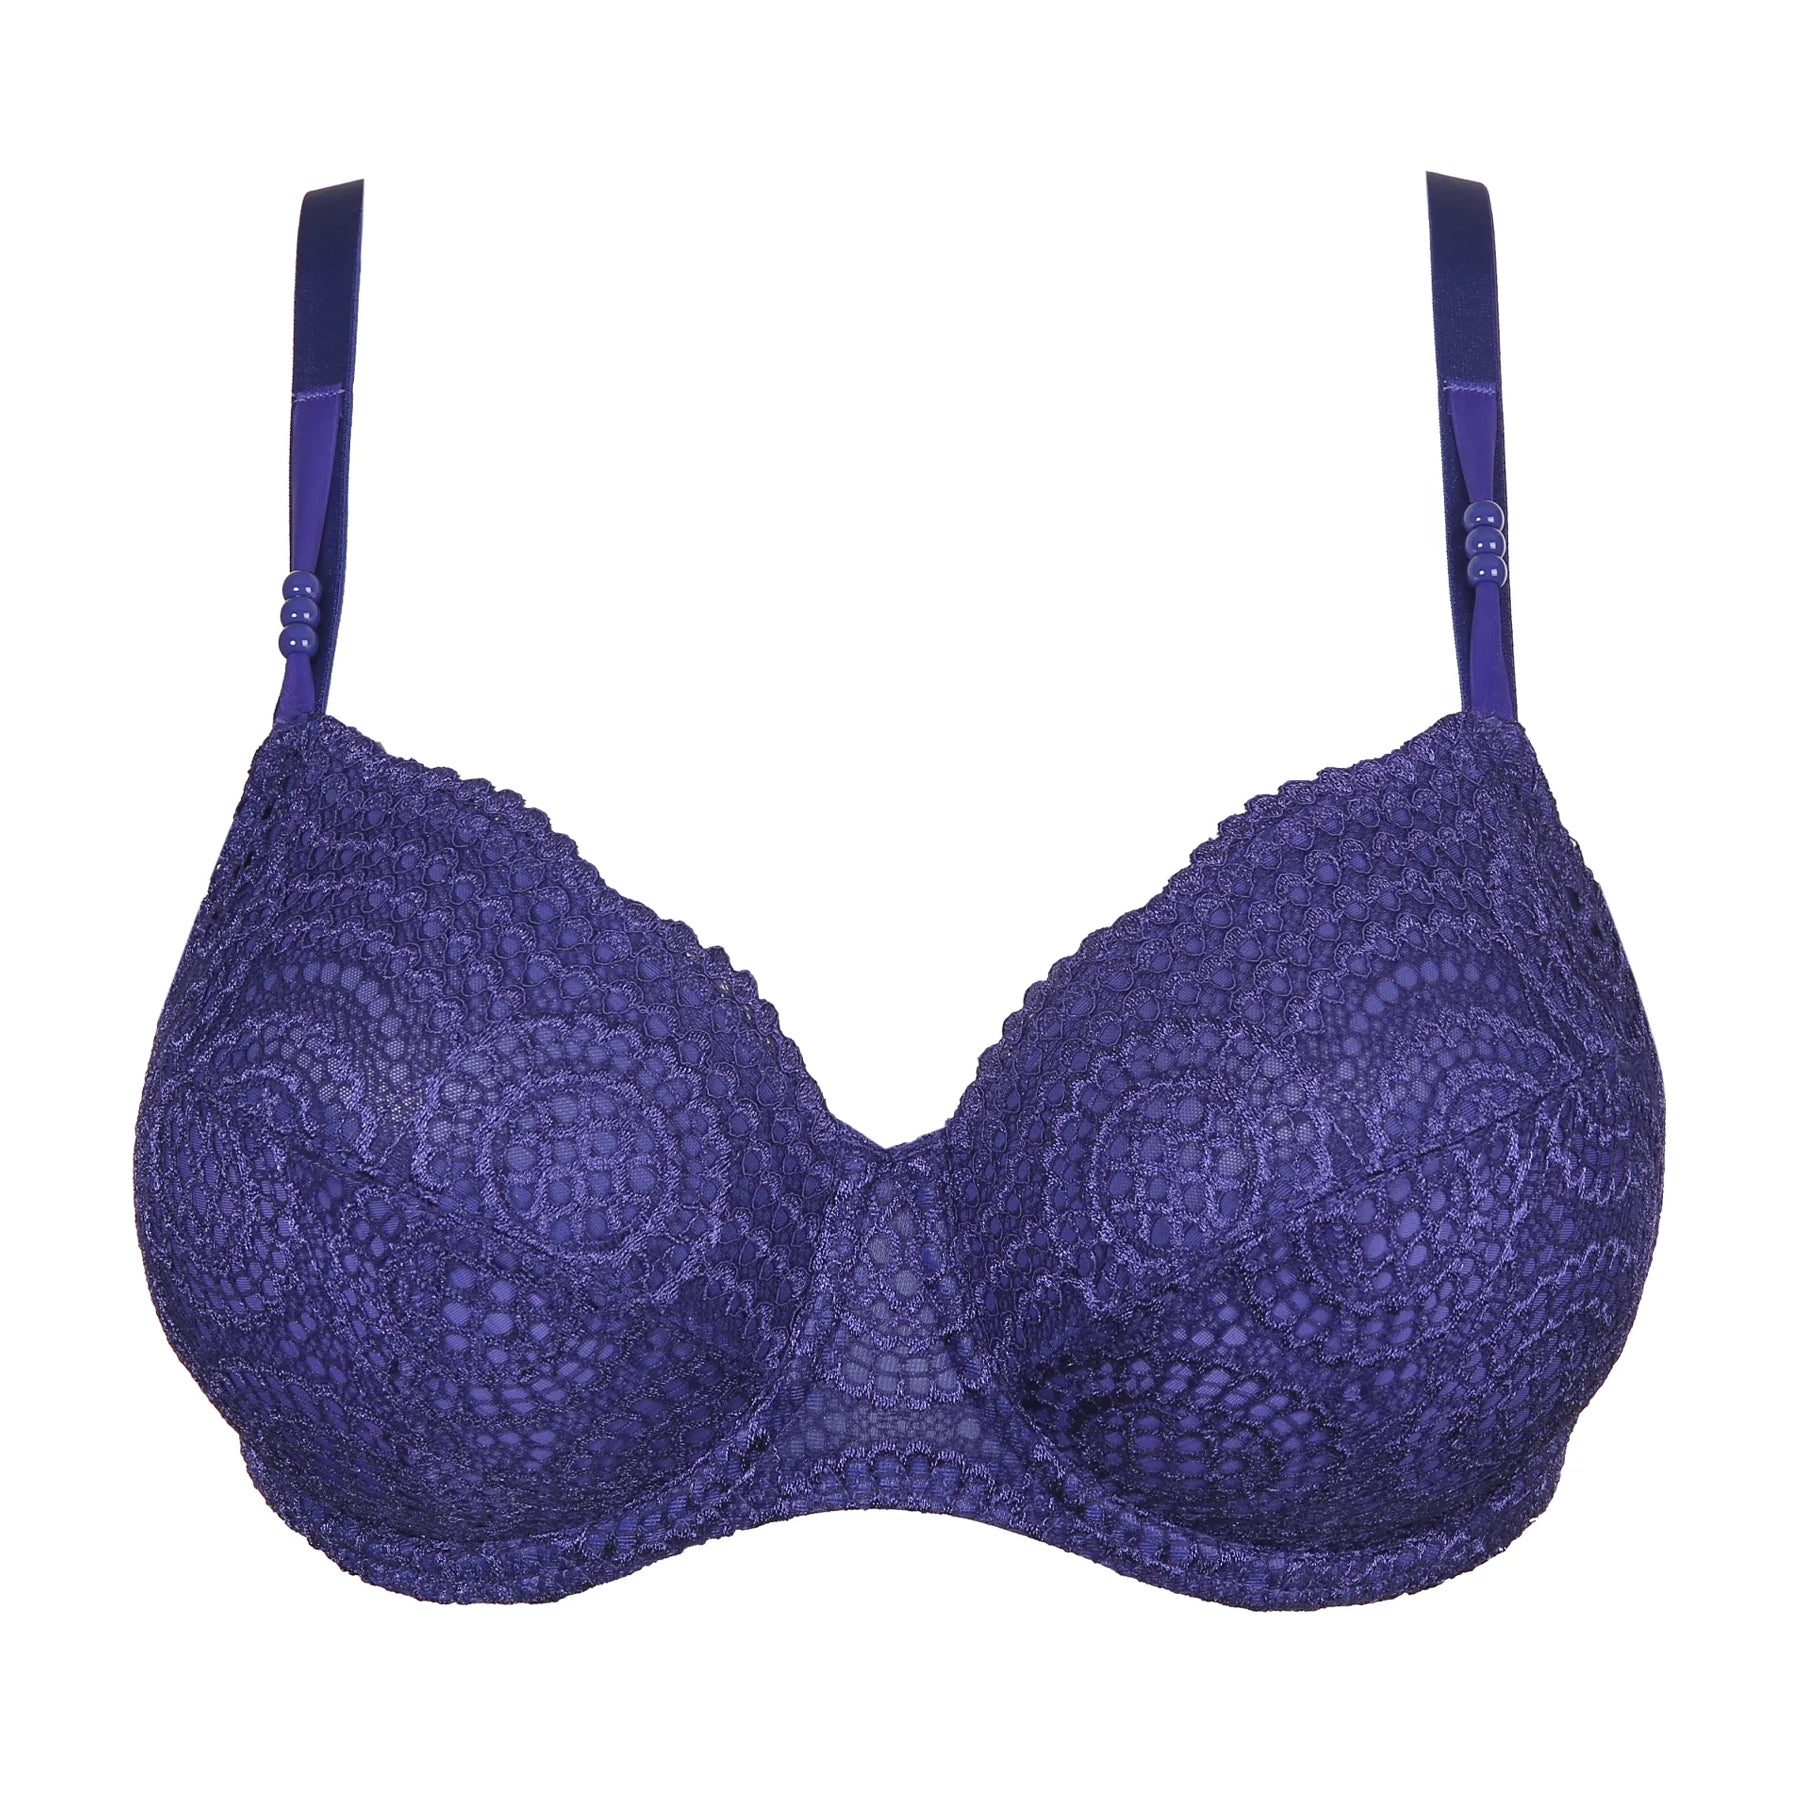 Buy Elina Women's Blue Violet B-Cup Pushup Bra (Set of 2) Online at Low  Prices in India 